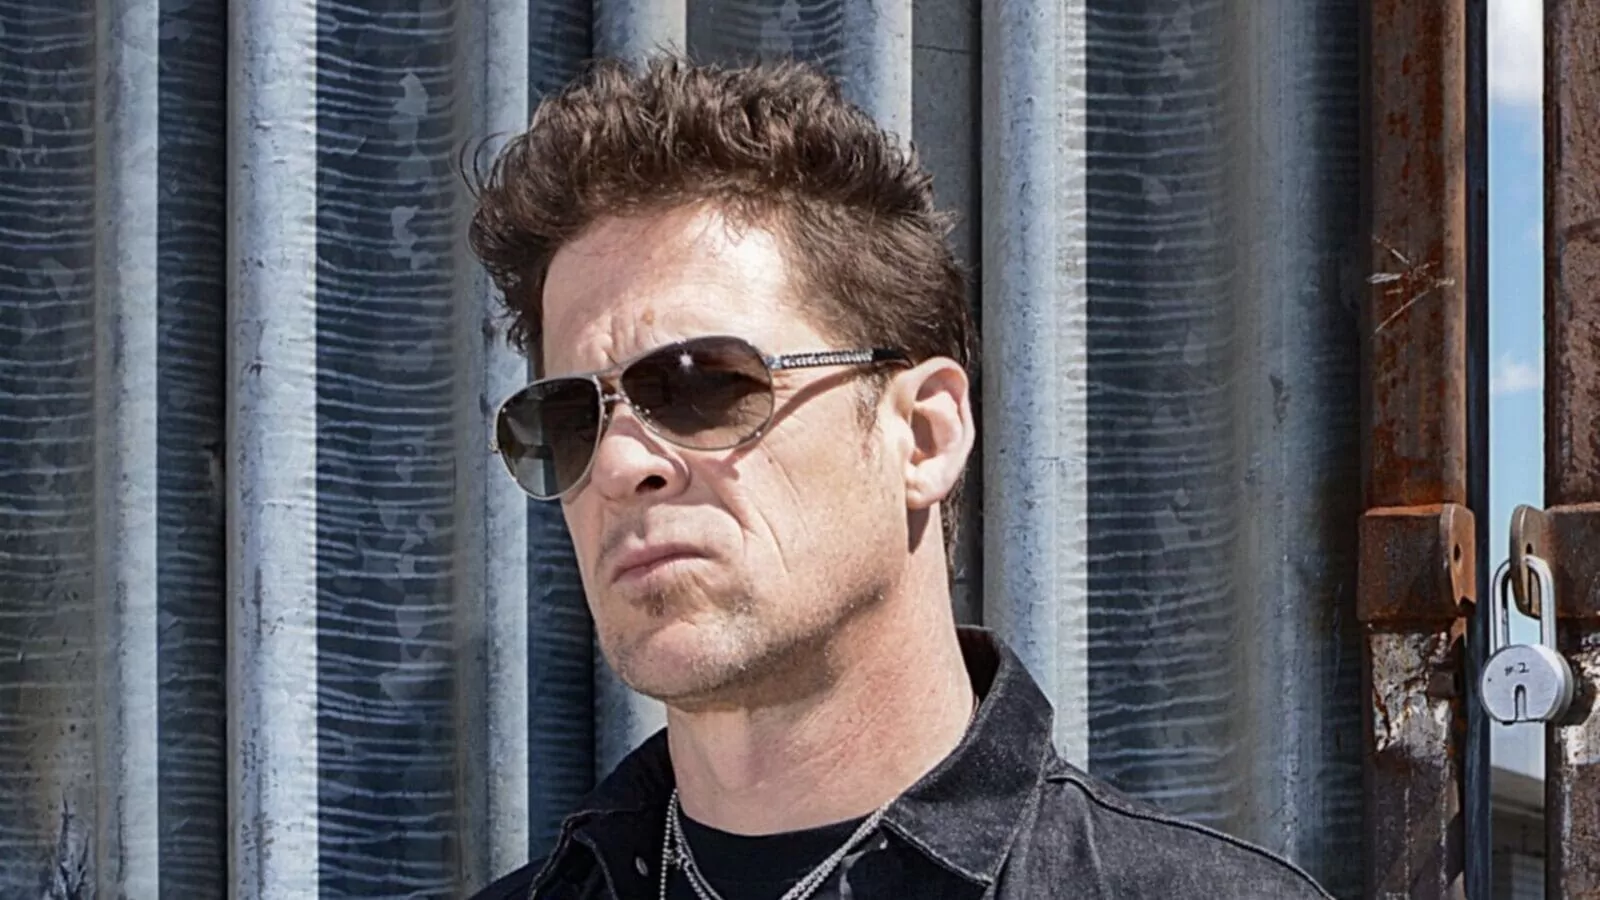 The 2 Music Bands That Jason Newsted Said Metallica "Potential"